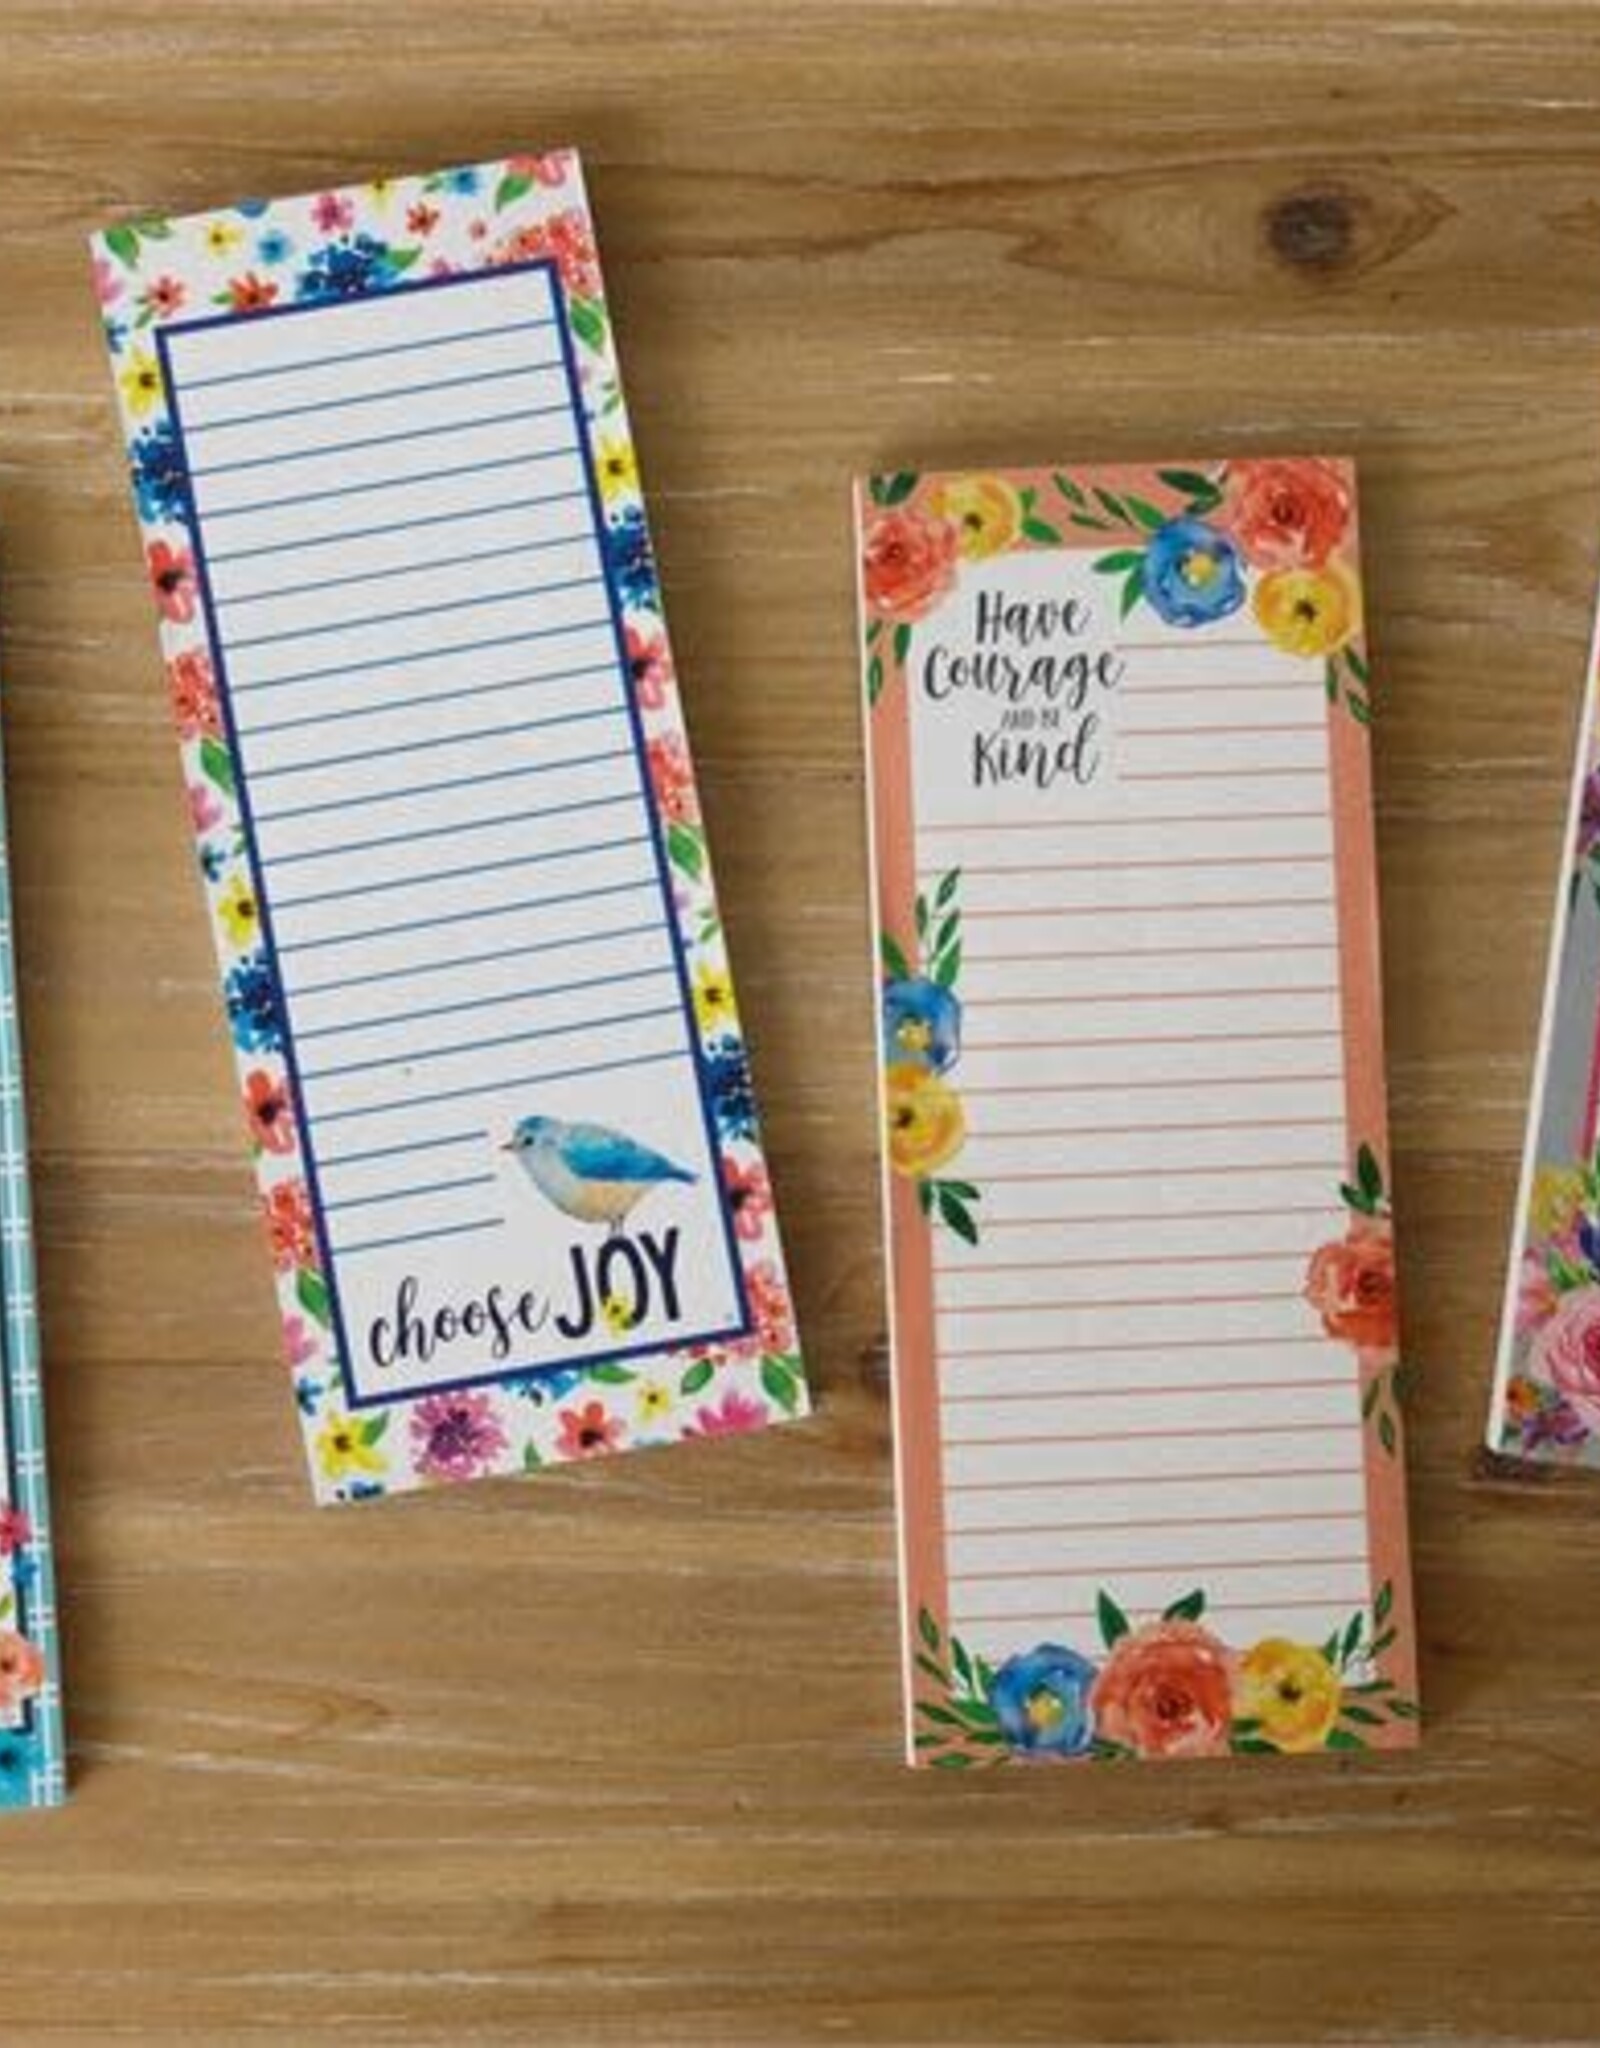 Magnetic Notepad - Inspirational Quotes